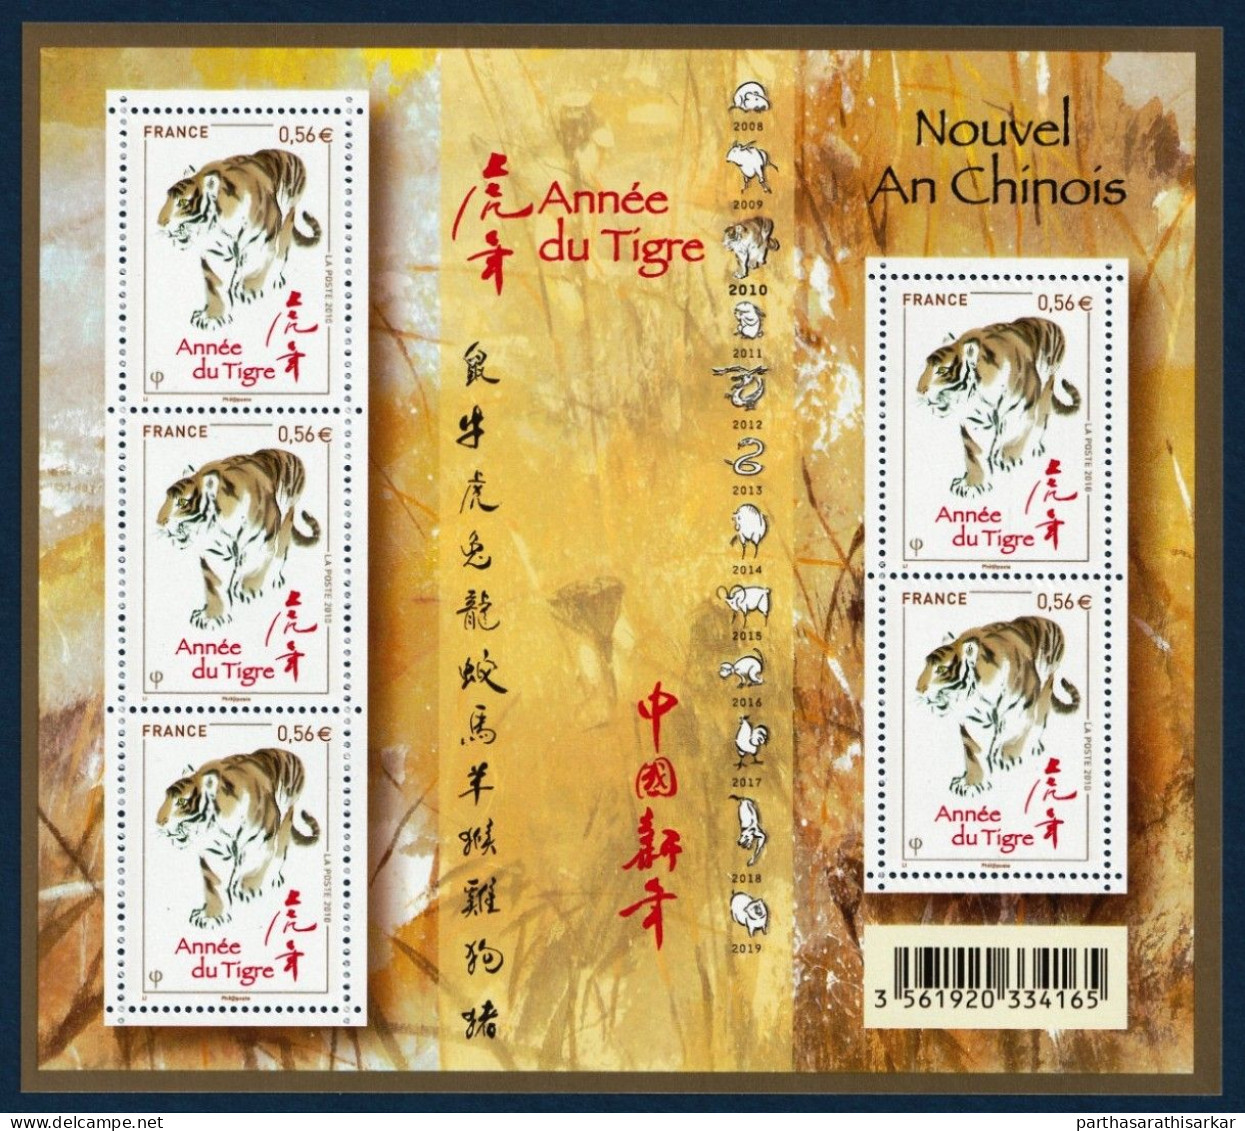 FRANCE 2010 YEAR OF THE TIGER LUNAR NEW YEAR MINIATURE SHEET MS MNH - Unused Stamps